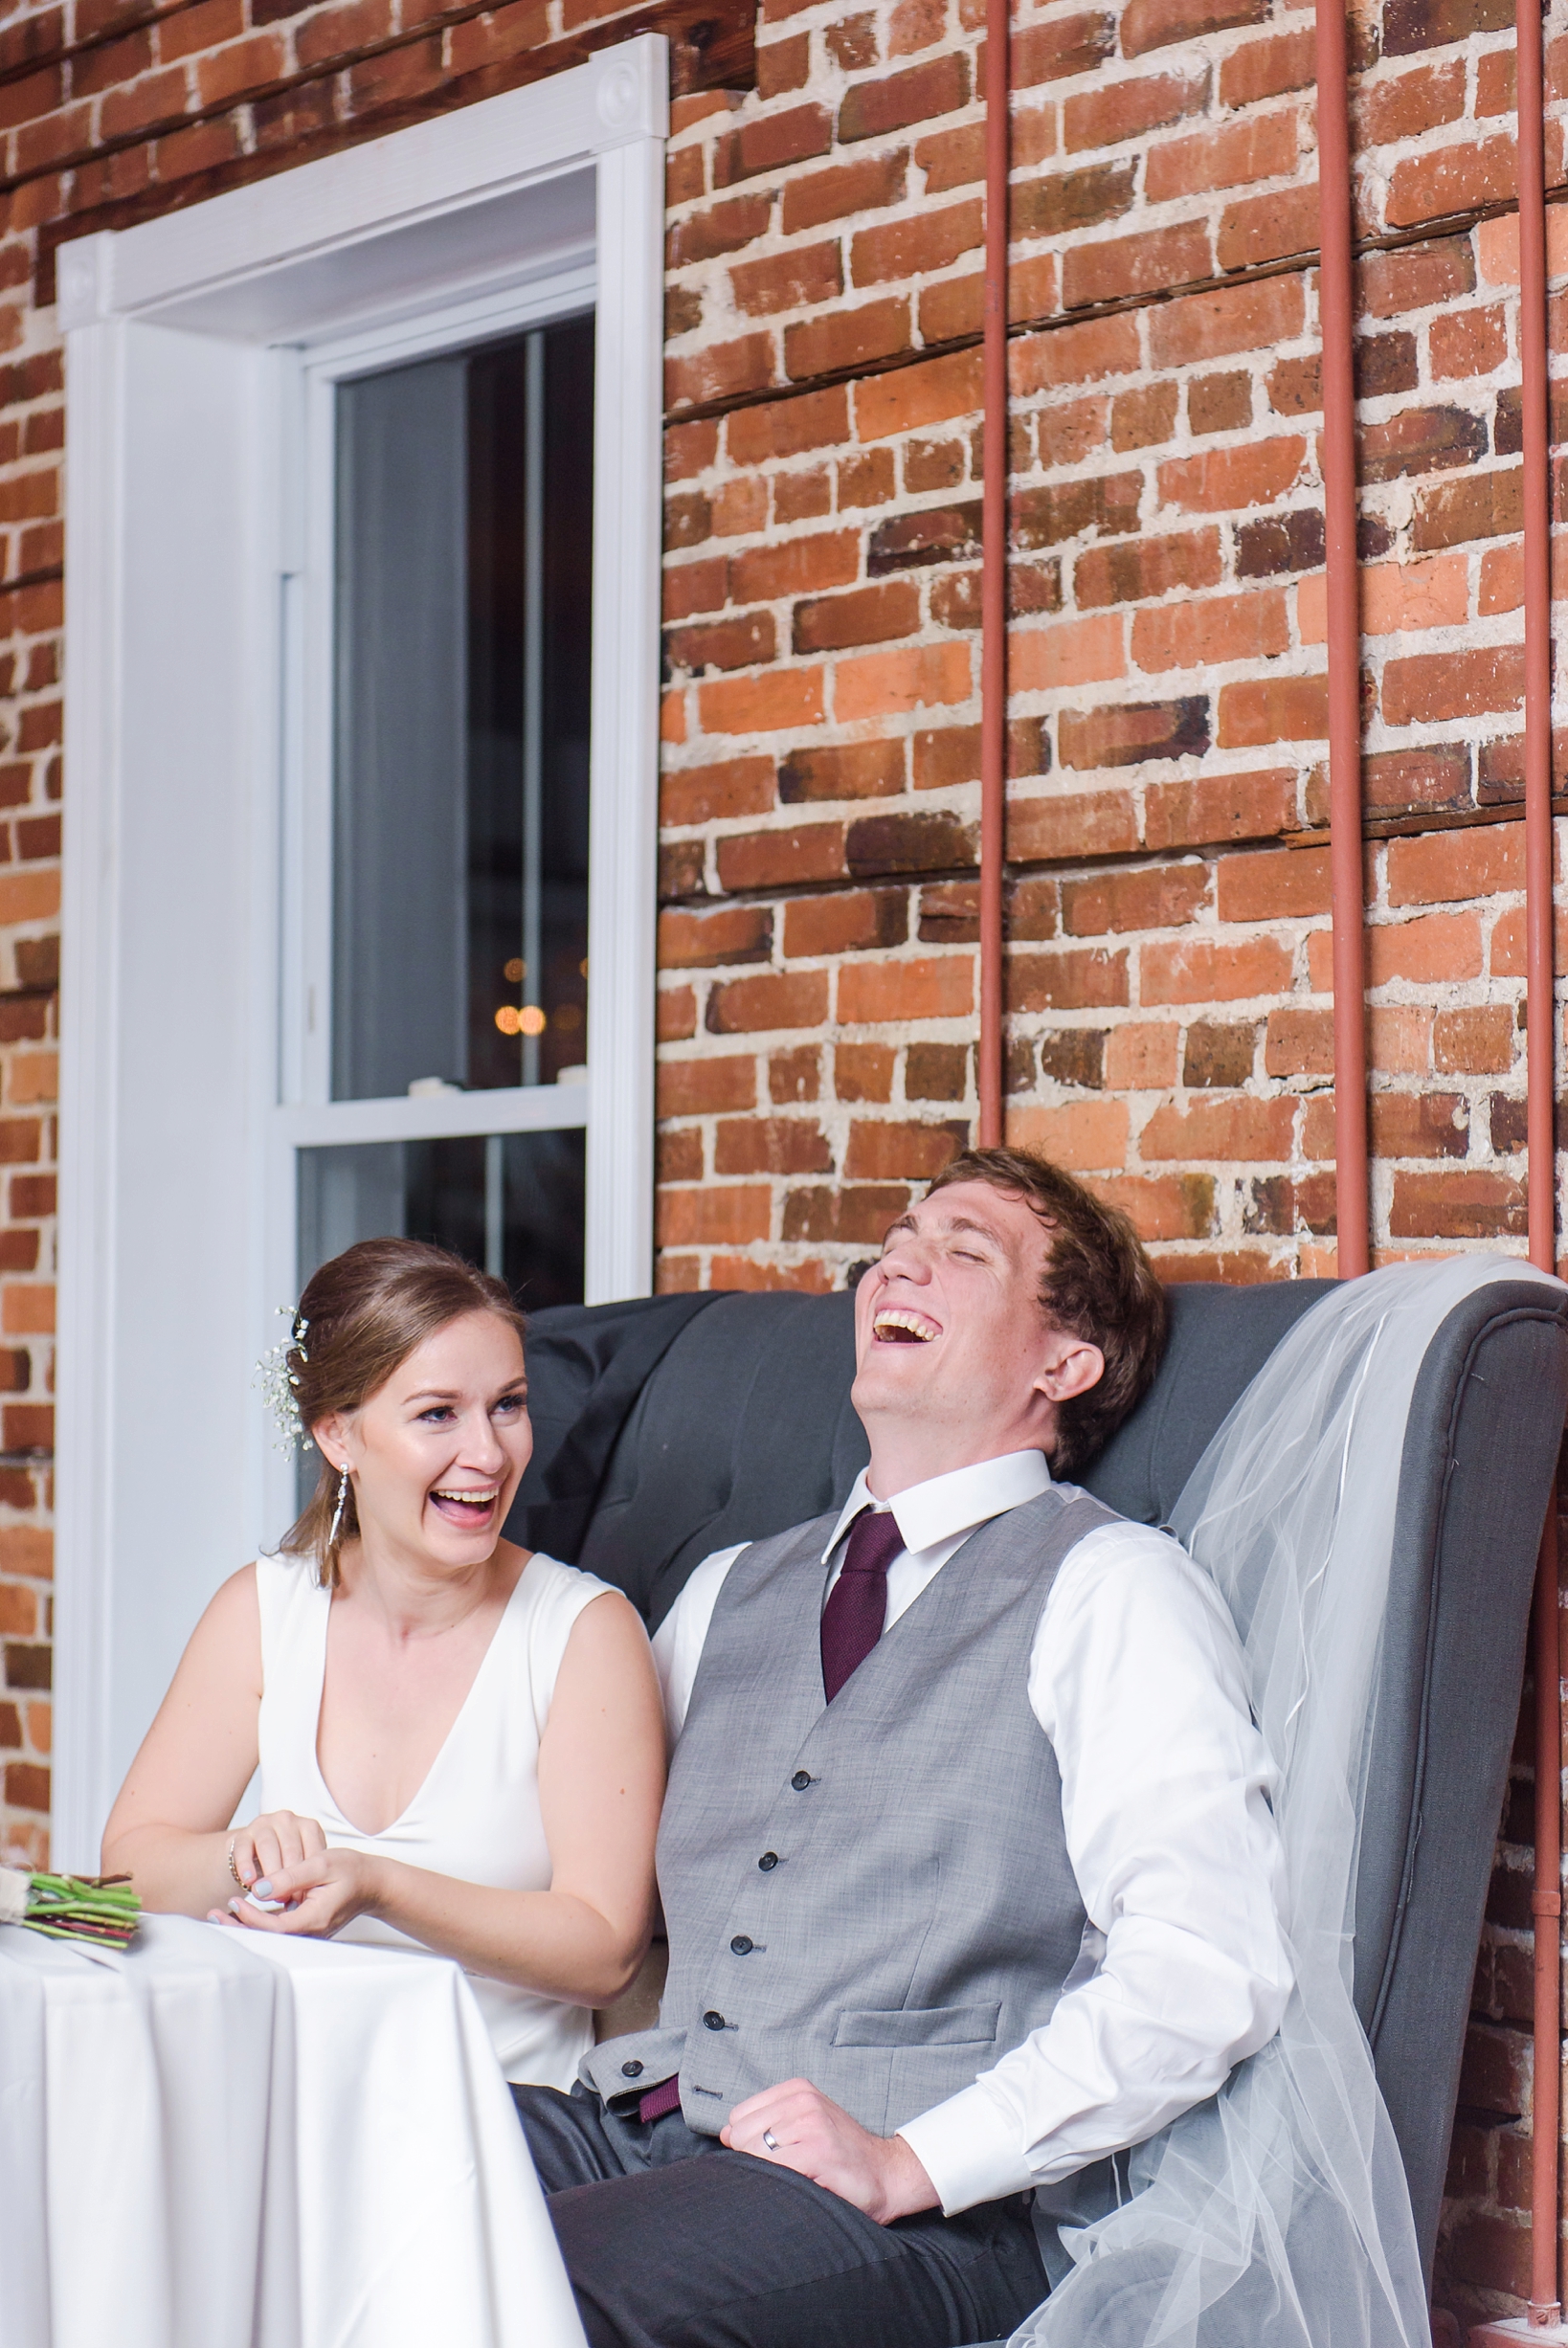 Bride and Groom laugh during the speeches given by the maid of honor and best man